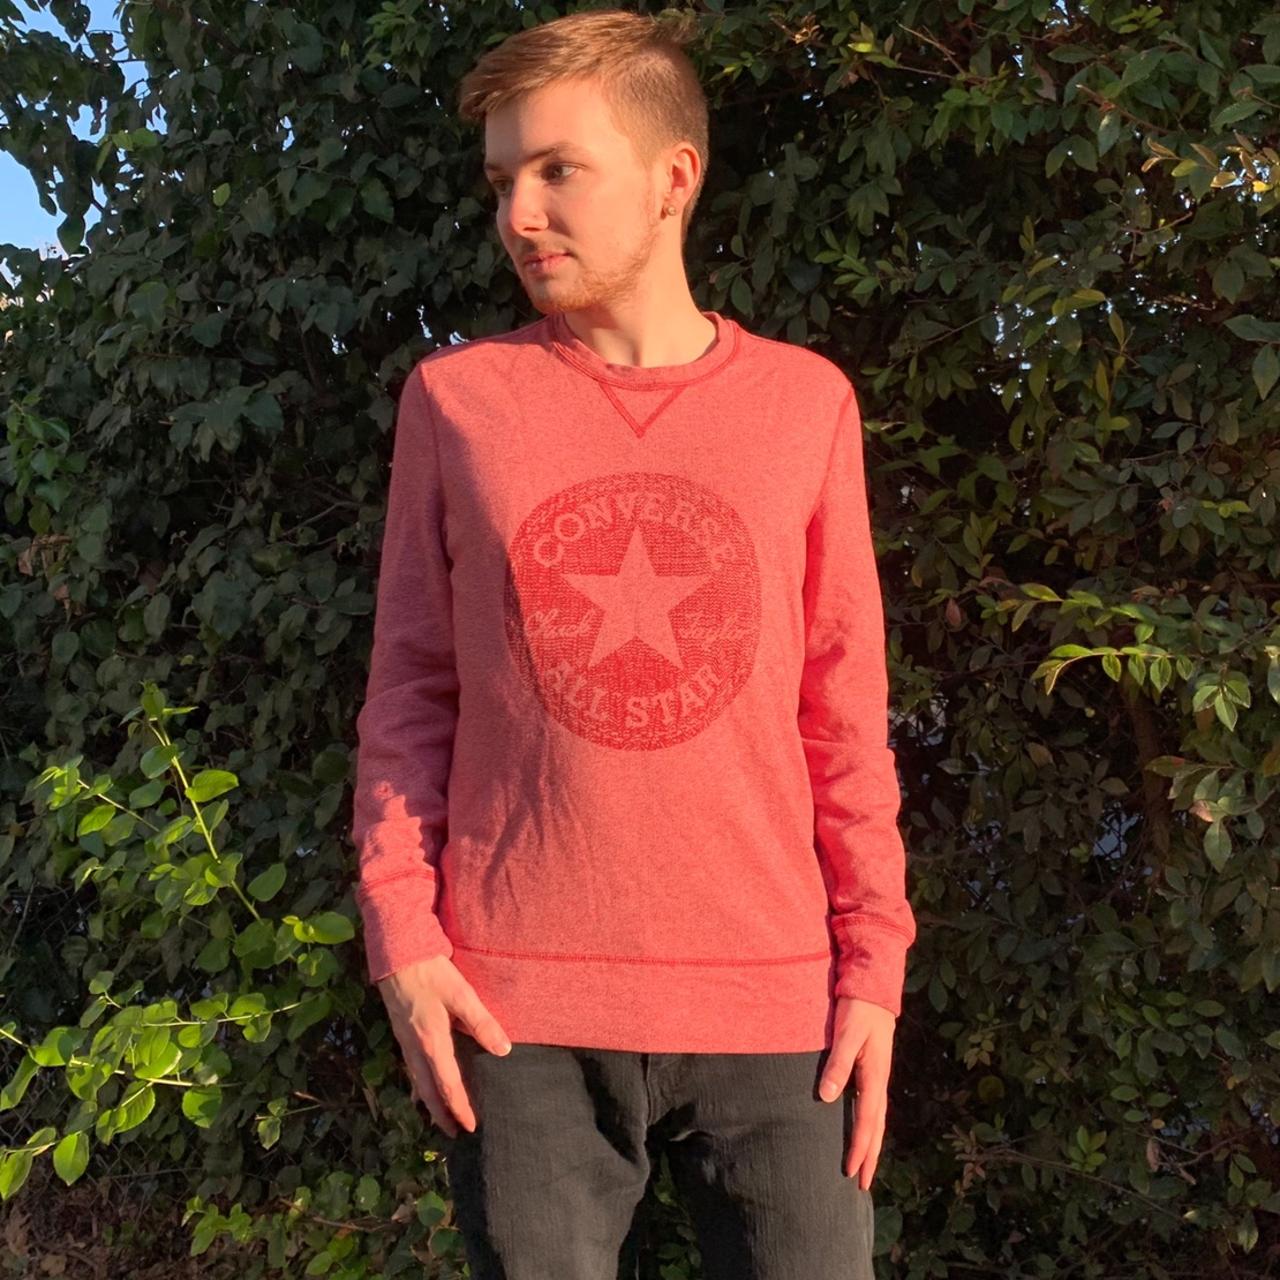 Converse Men's Pink and Red Jumper